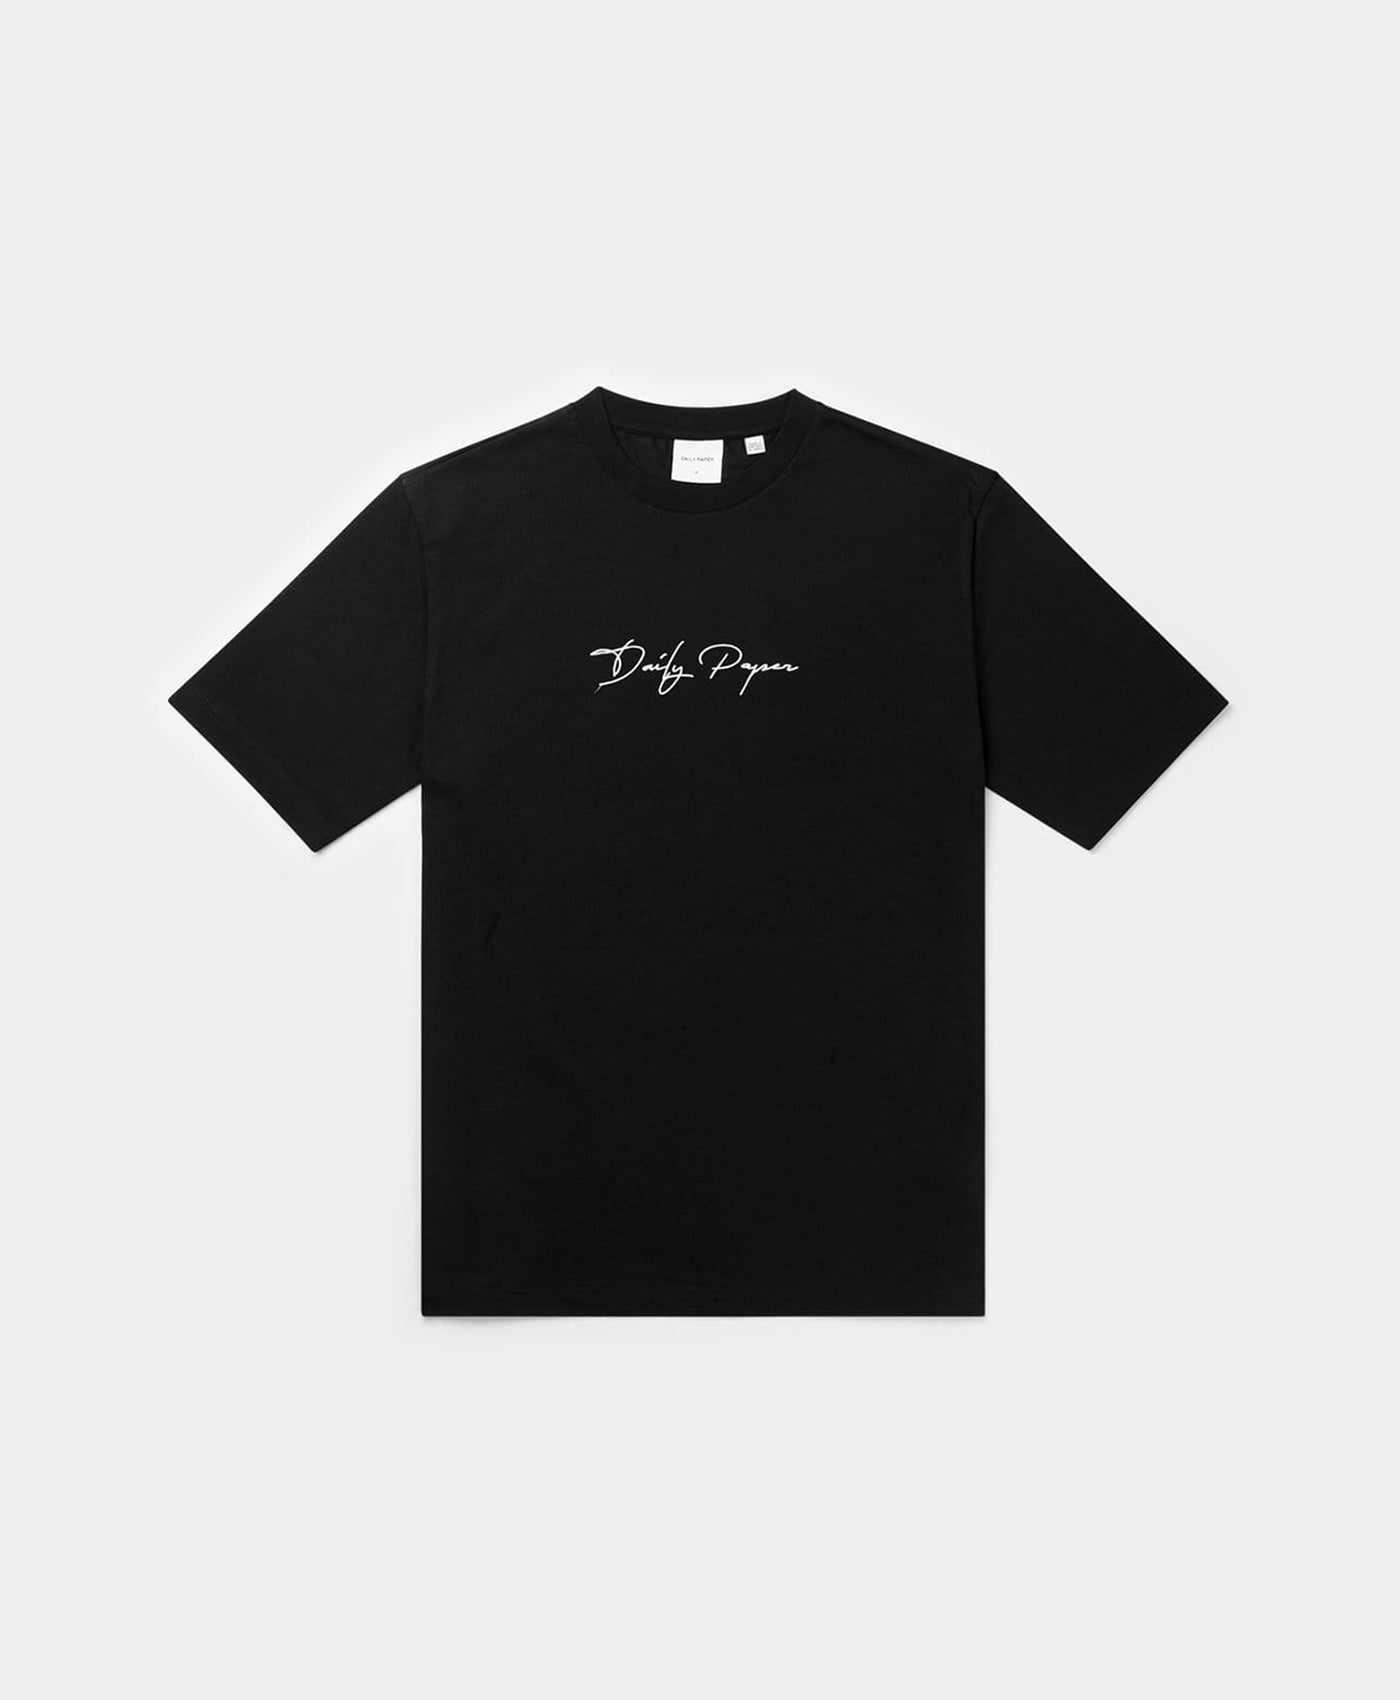 Daily - Black T-Shirt Daily Paper Worldwide